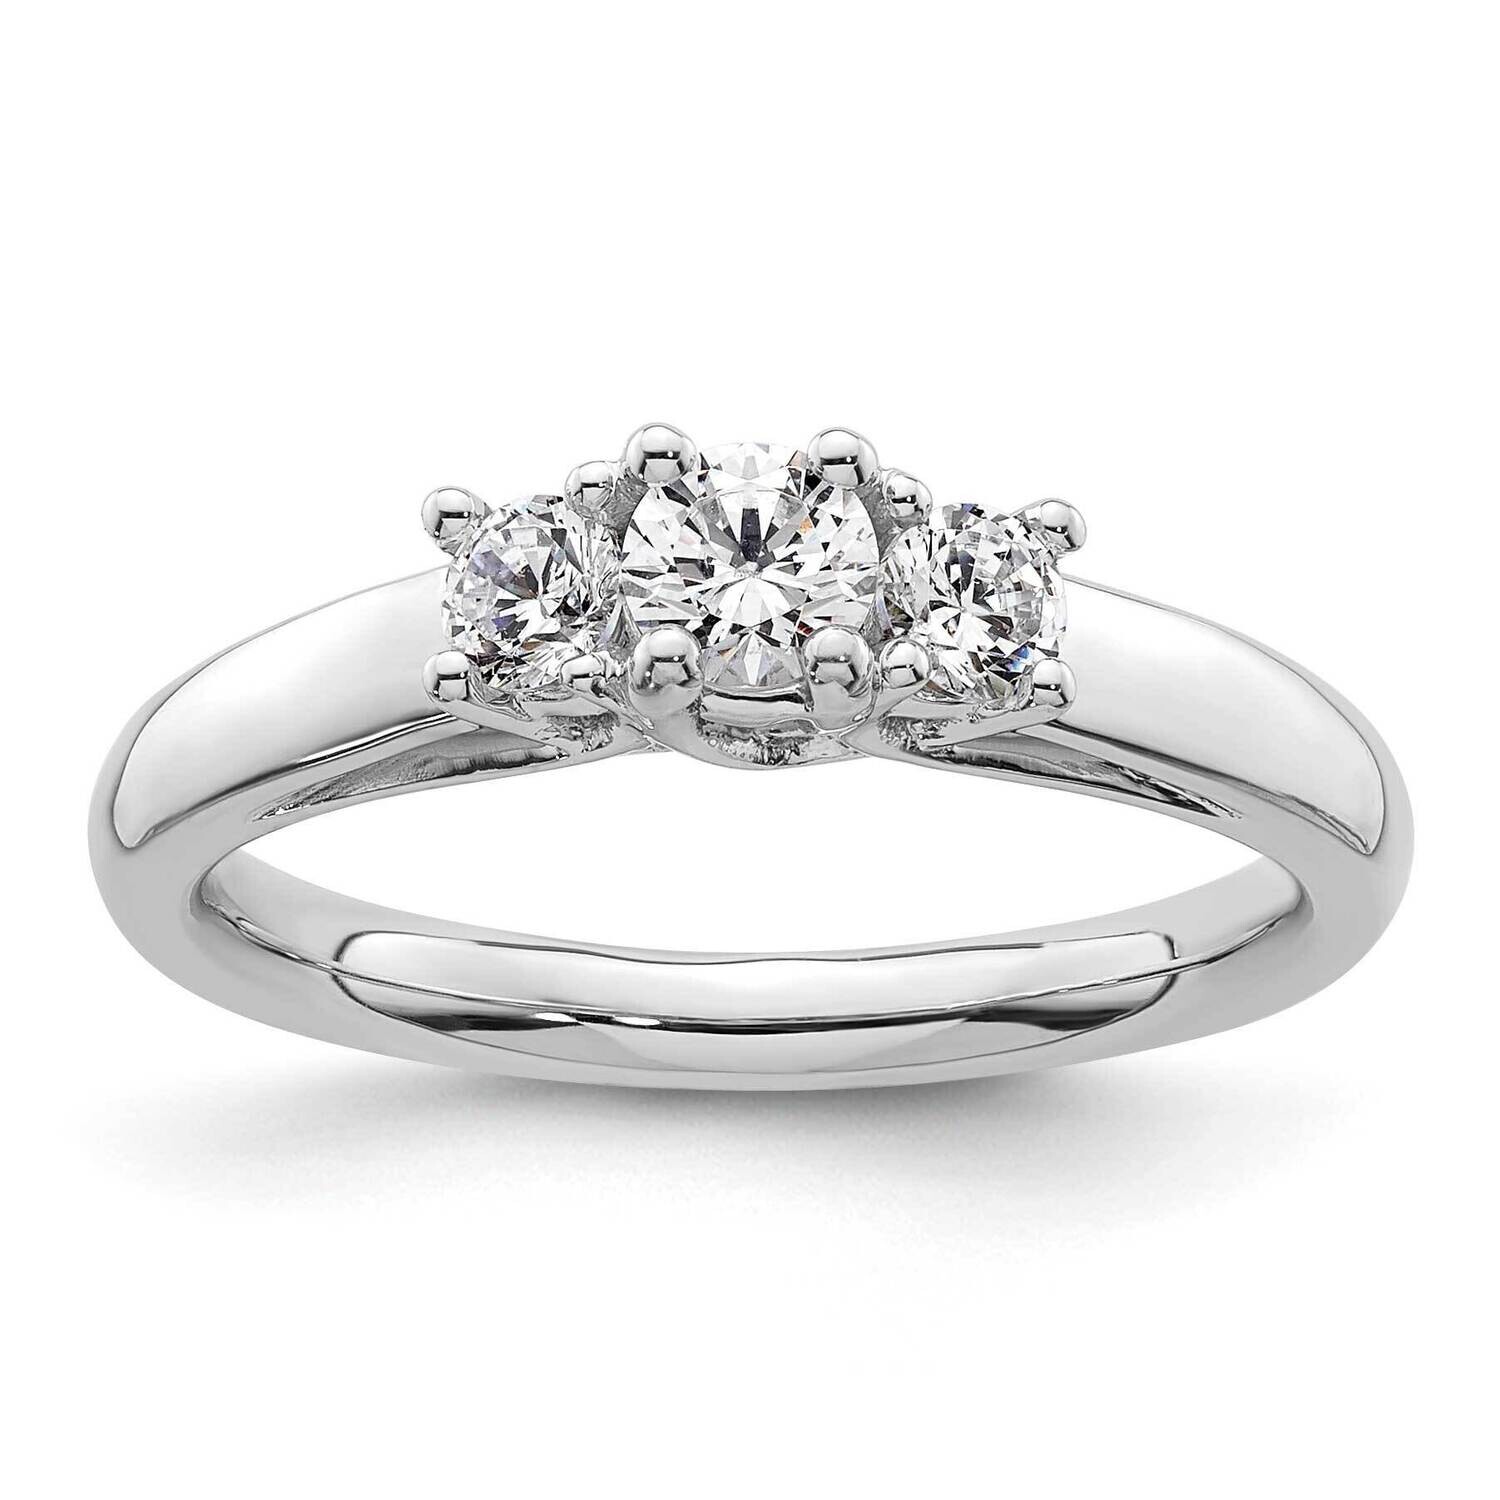 3-Stone Holds 1/4Carat 4.1mm Round Center 2-3.2mm Round Sides Engagement Ring Mounting 14k White Gold RM2955E-025-CWAA